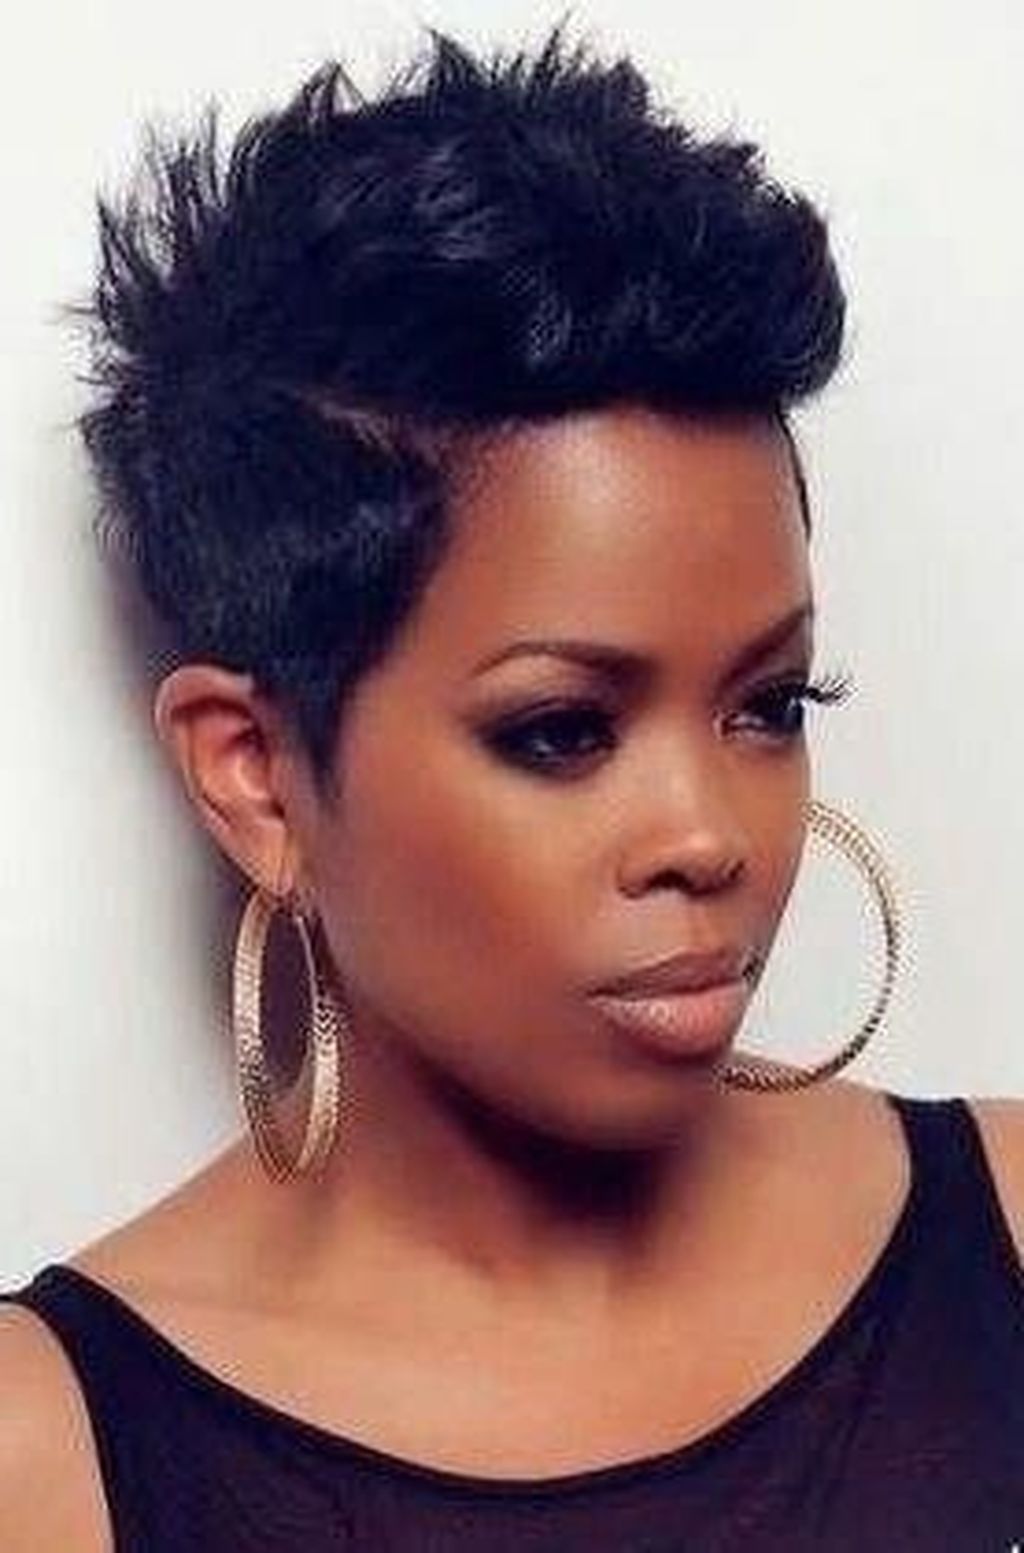 41 Superb African American Short Pixie Haircuts Ideas To Try Asap -   6 hairstyles Black pixie haircuts ideas